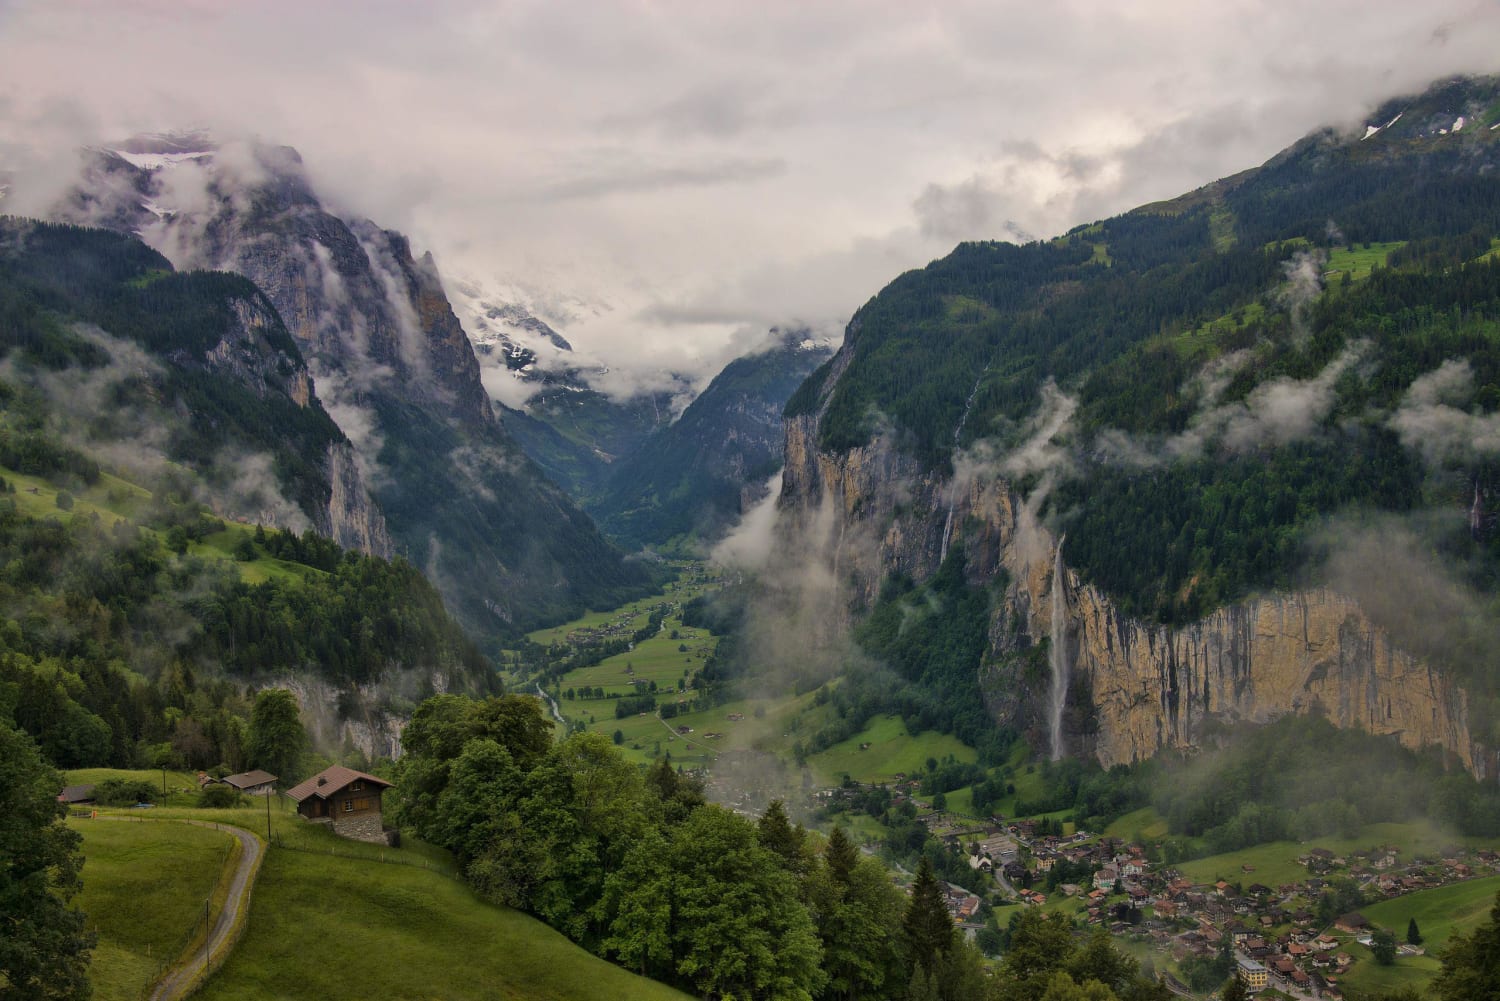 Tolkien may have based Rivendell on his 1911 visit to the Lauterbrunnental in Switzerland.